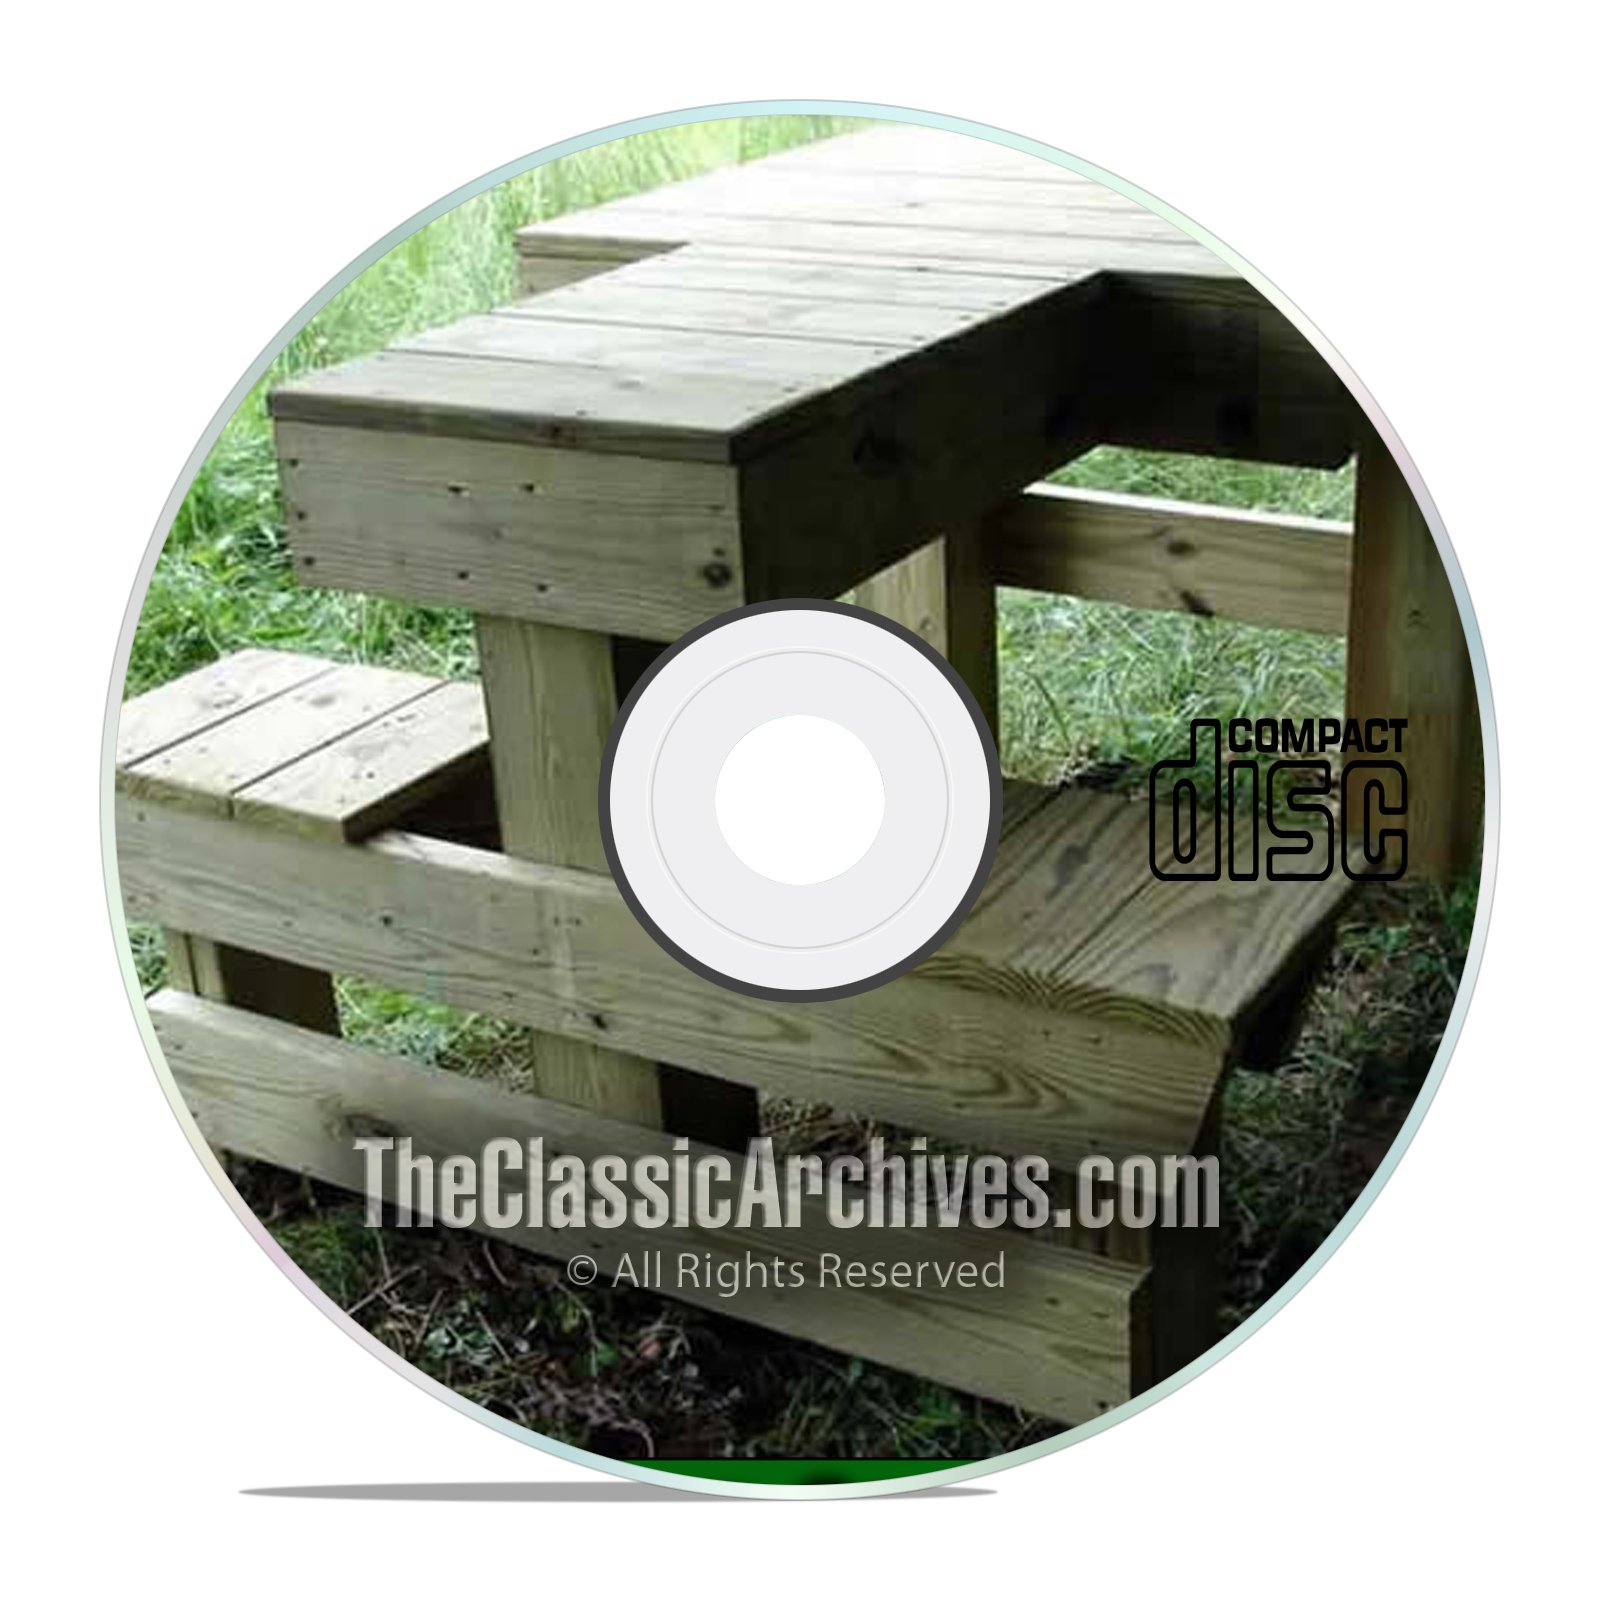 Professional Shooting Bench Plans, Build Your Own Bench, Ammo Books! PDF CD - Click Image to Close